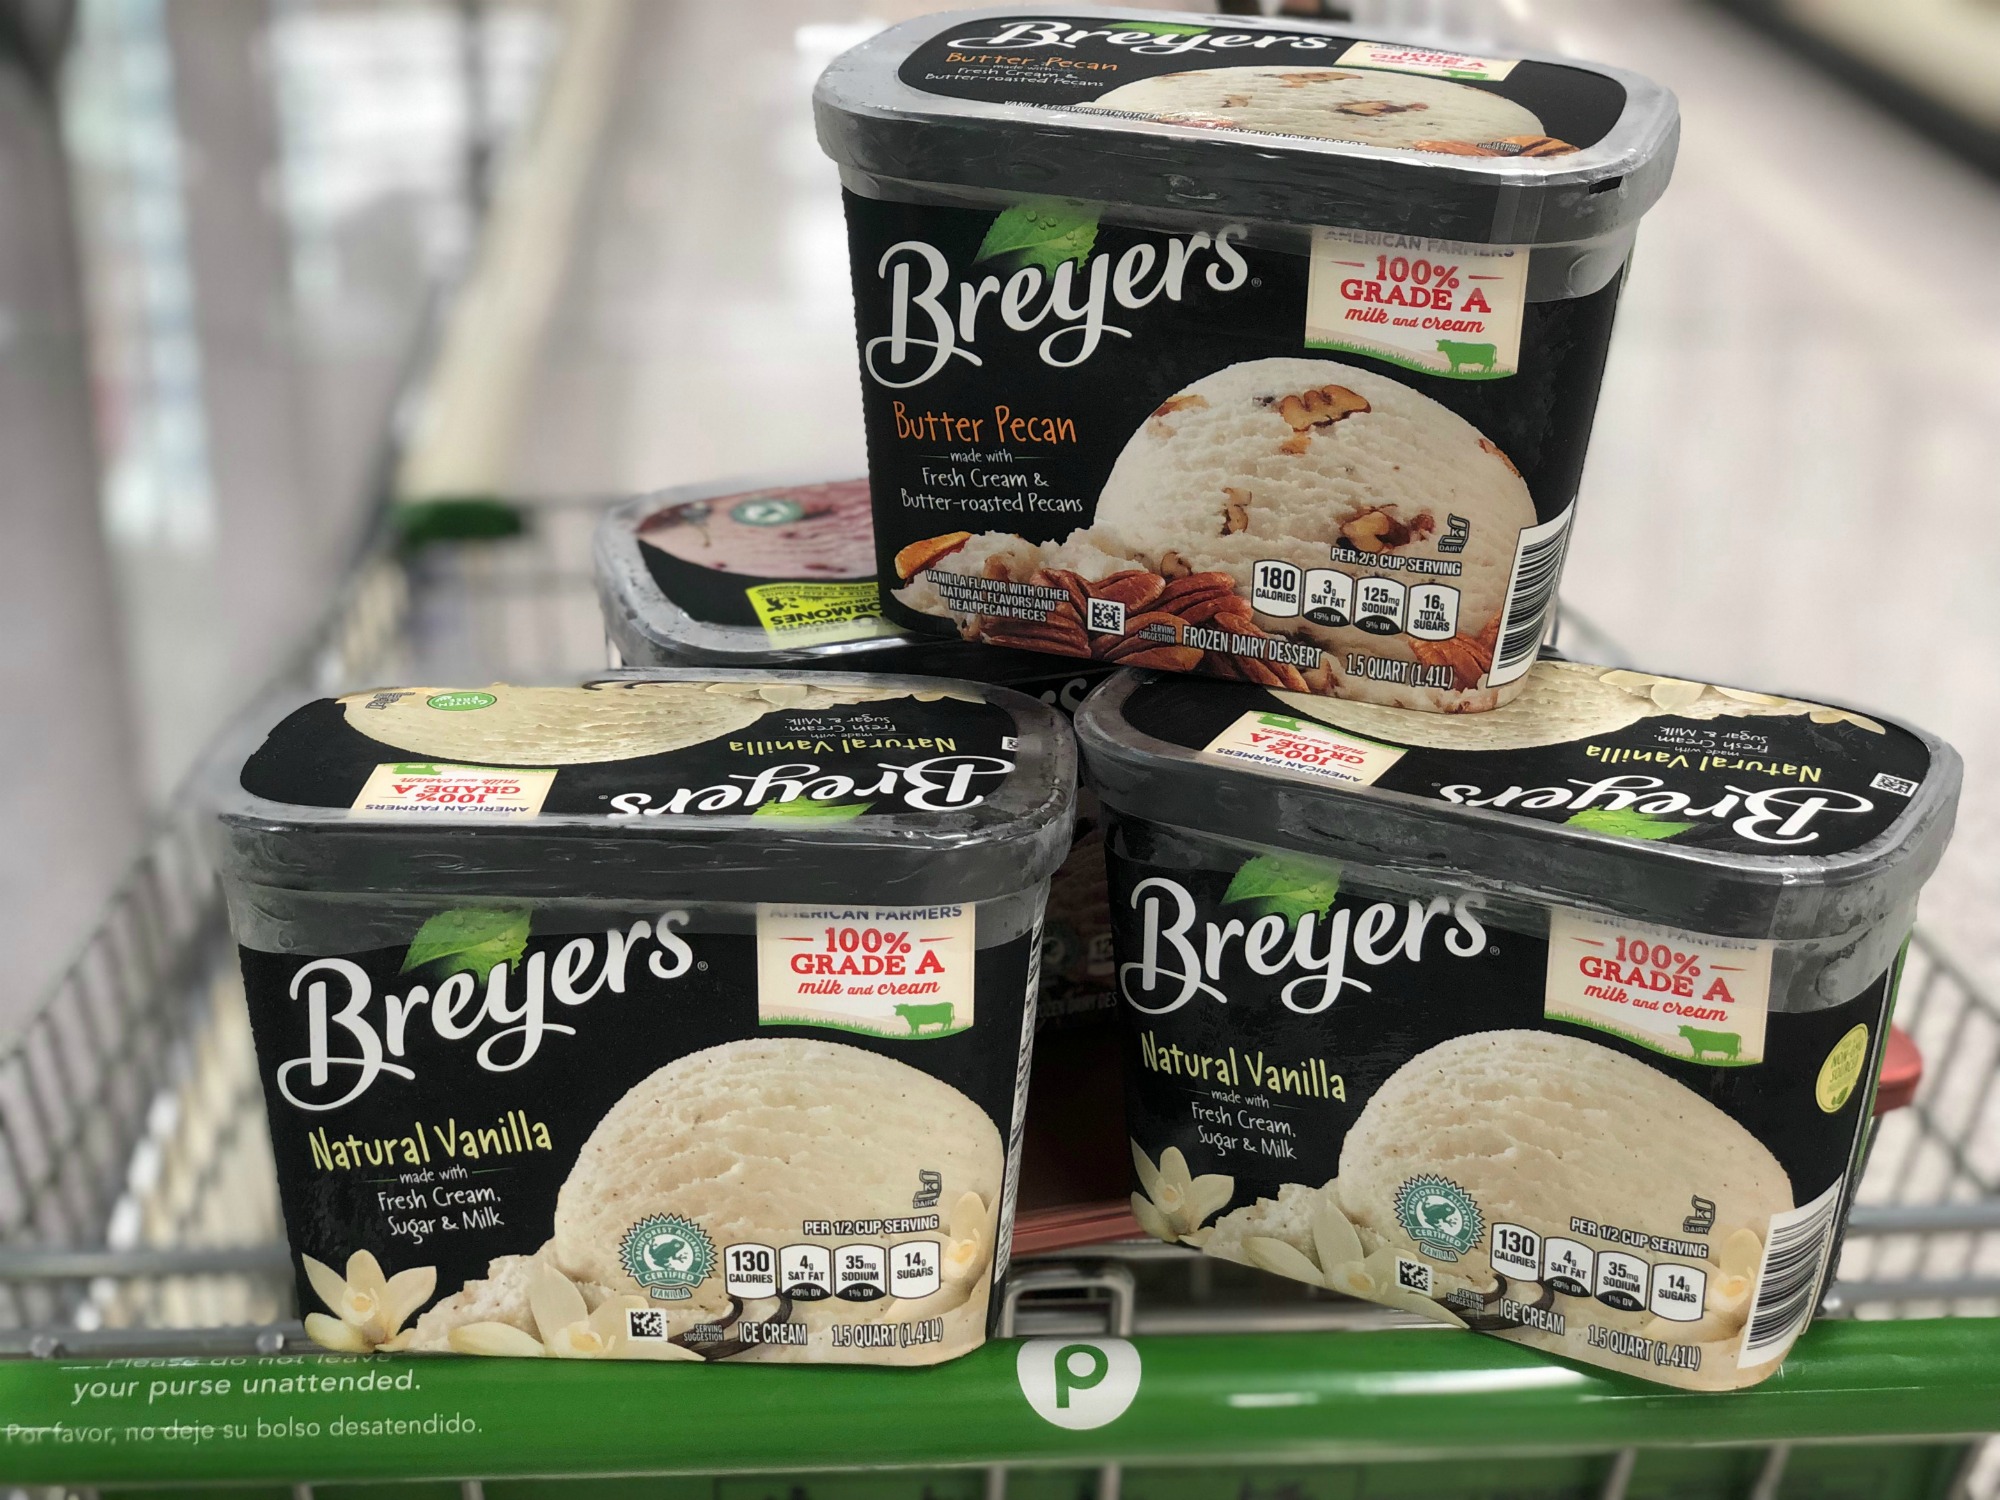 Fantastic Deal On Breyers Ice Cream This Week At Publix - Stock Your Freezer At A Great Price. on I Heart Publix